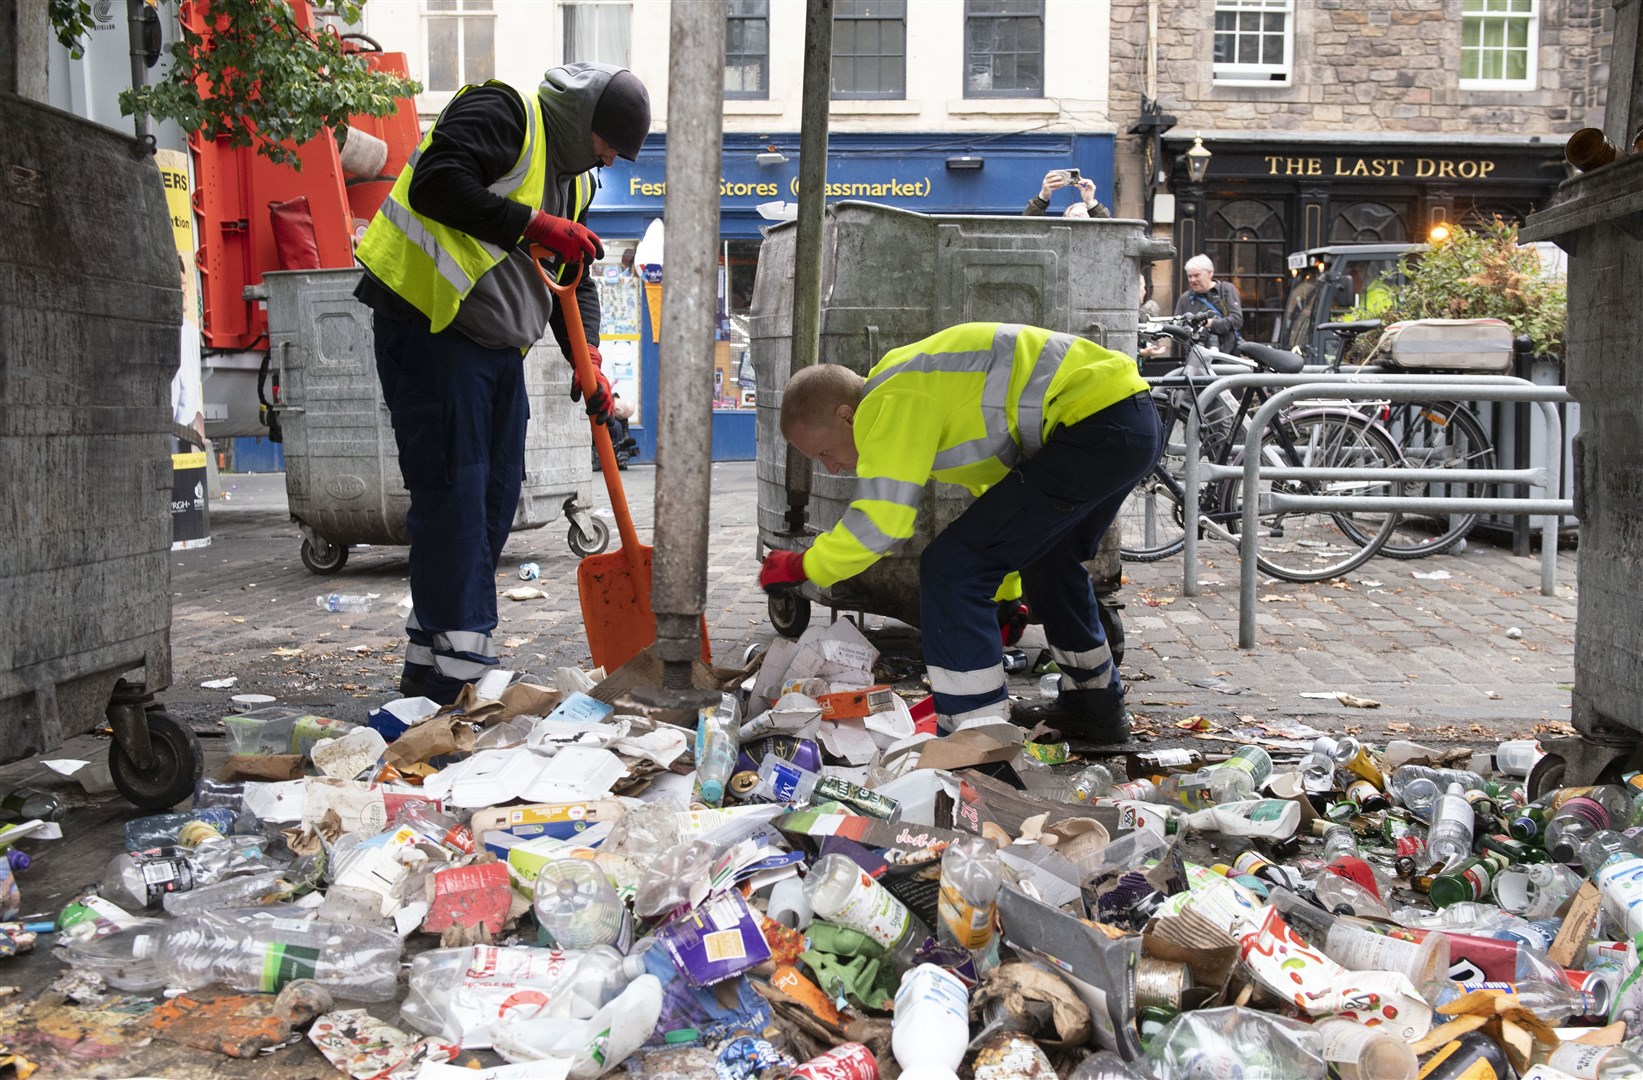 The clean up began on Tuesday (Lesley Martin/PA)